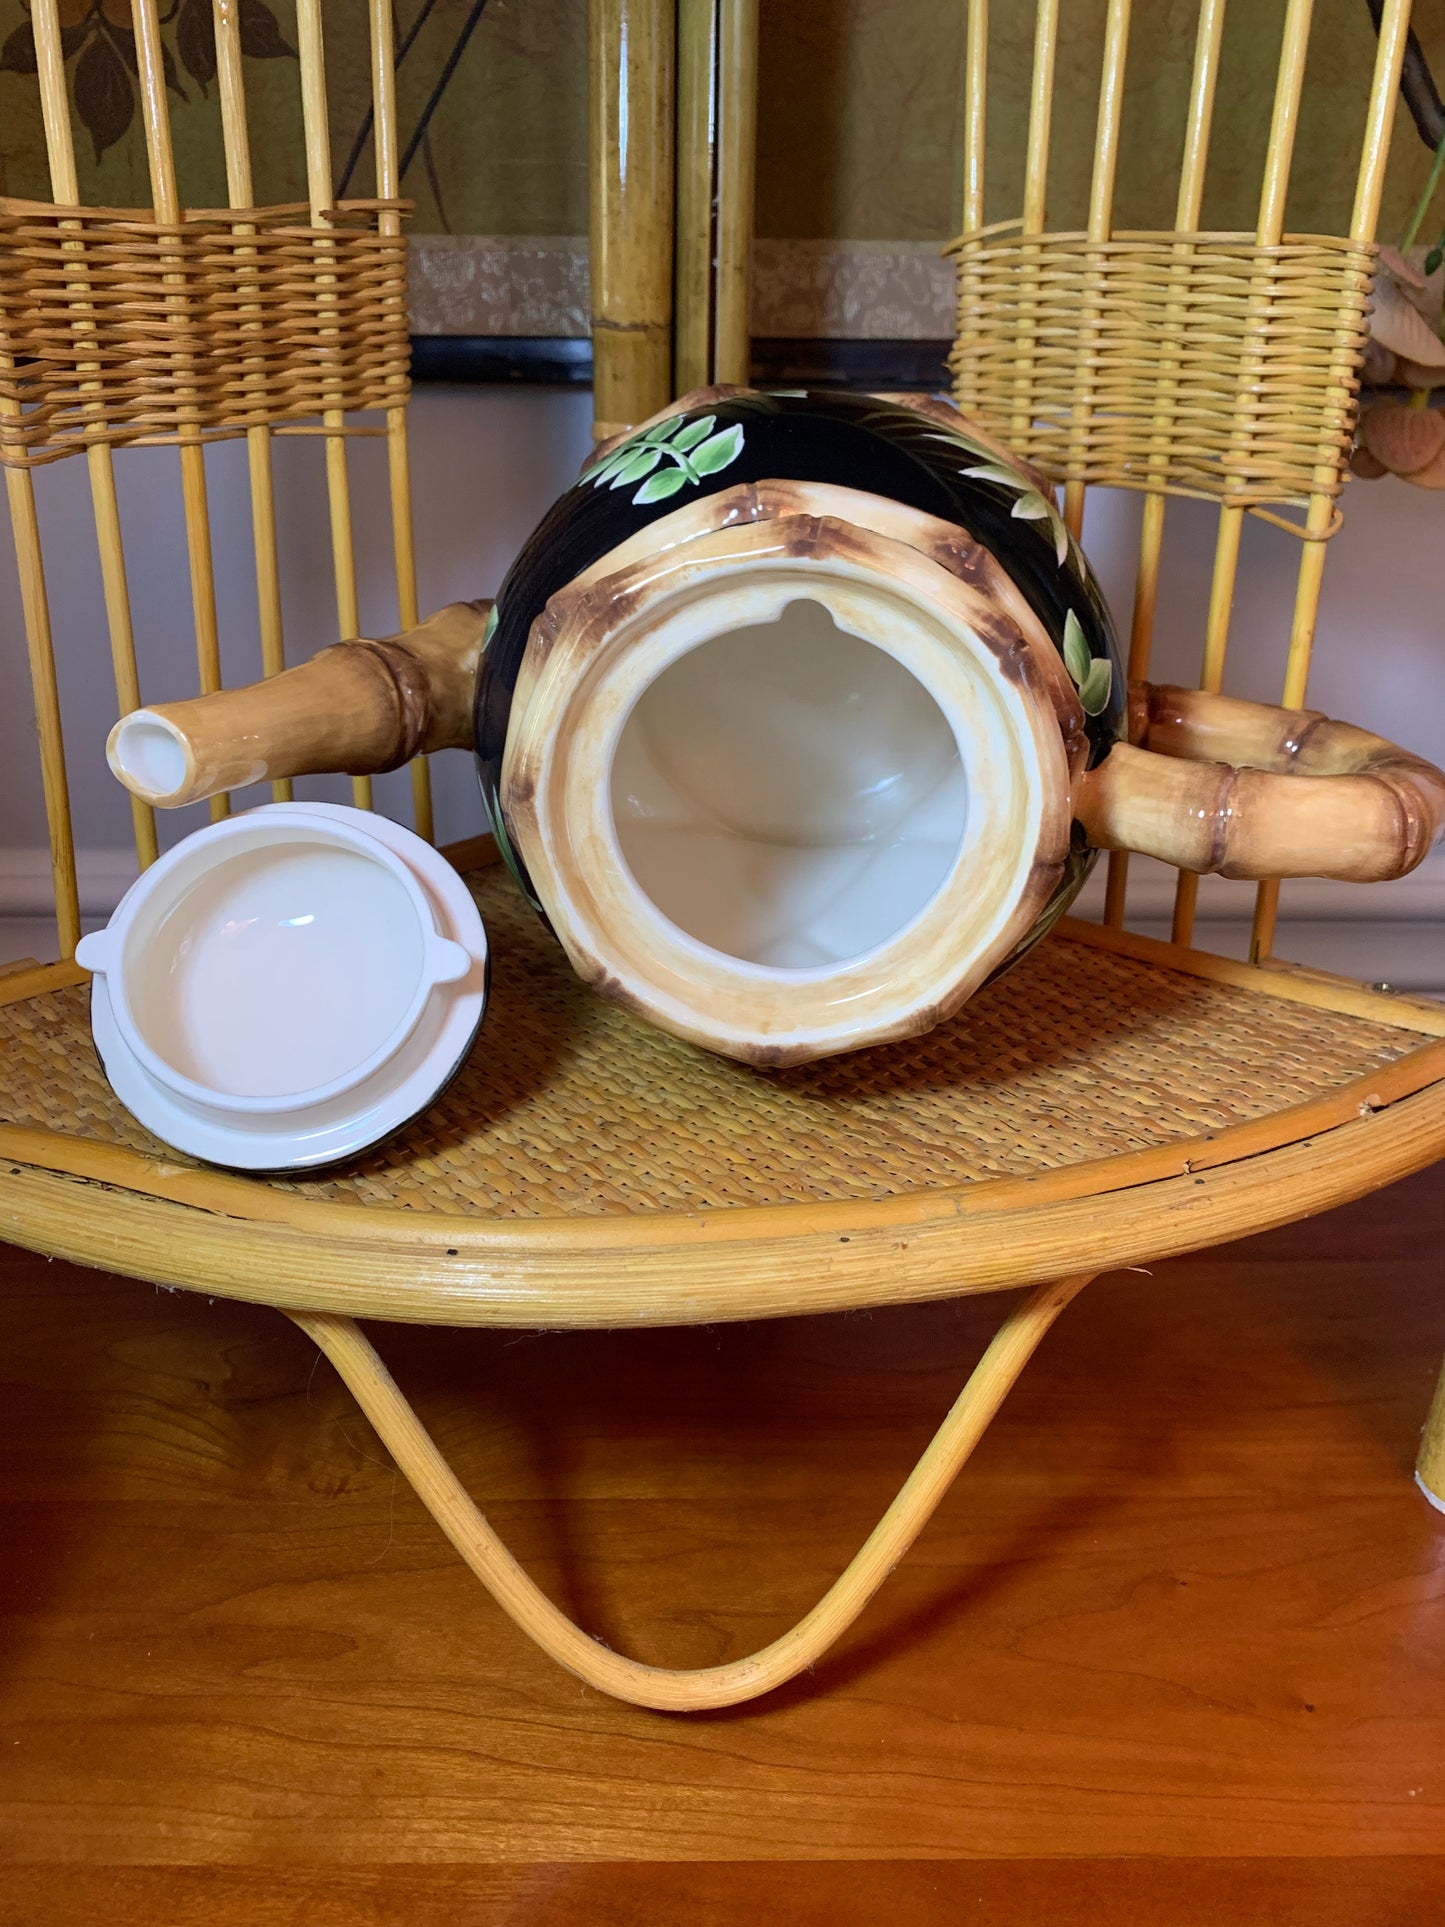 Amazing Set (5 piece) of Bamboo Serving Ware